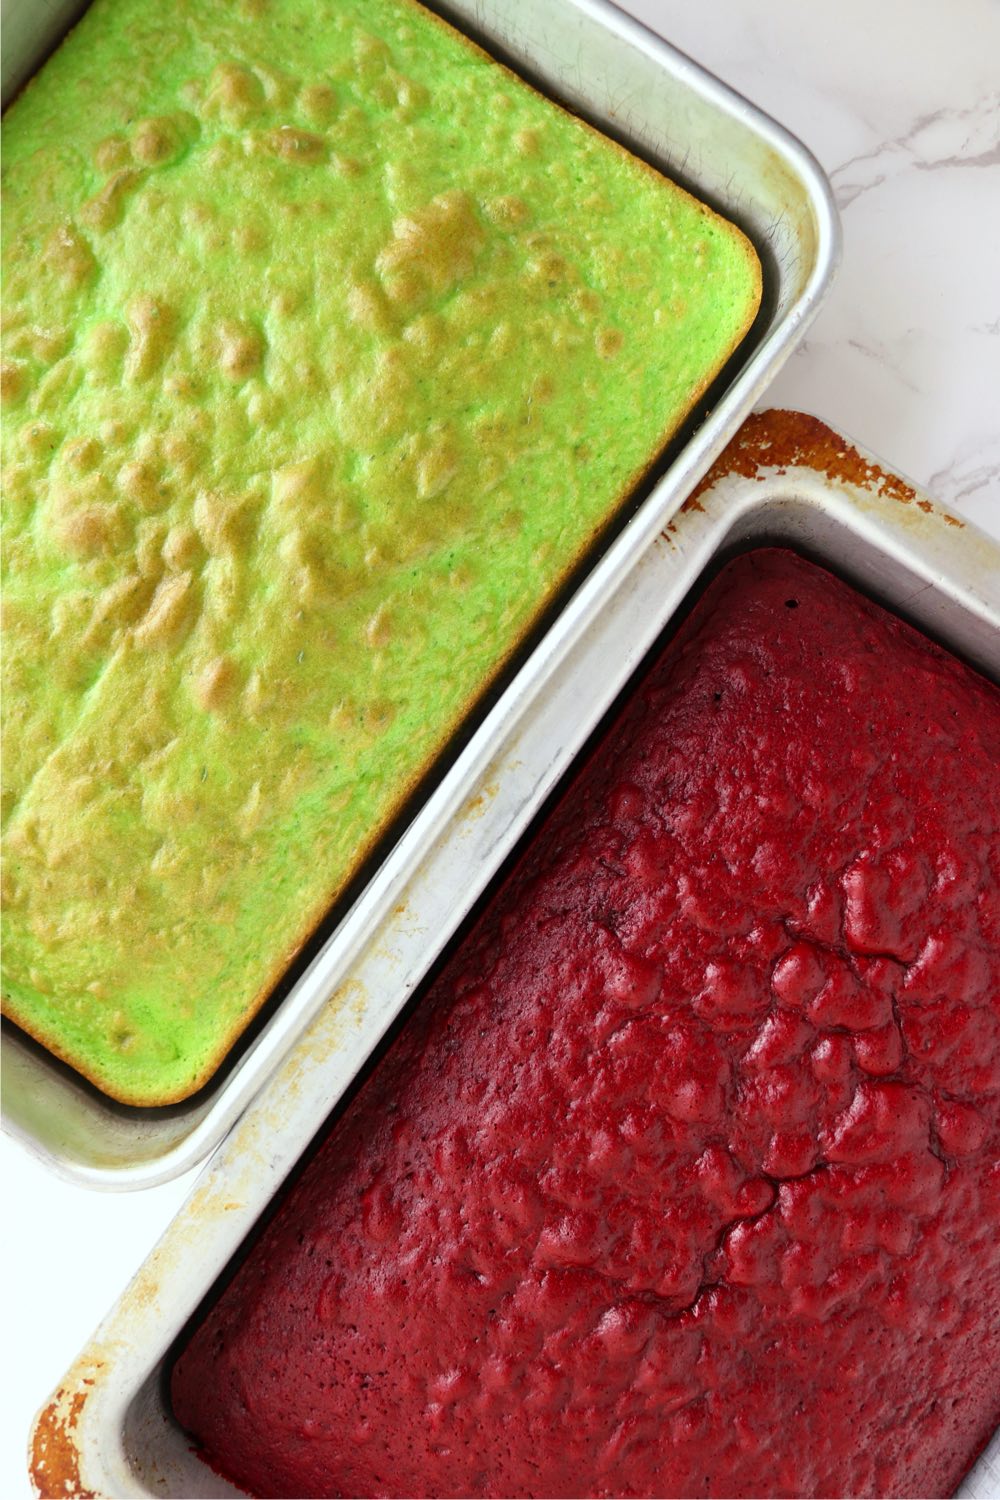 pans of green and red velvet cakes